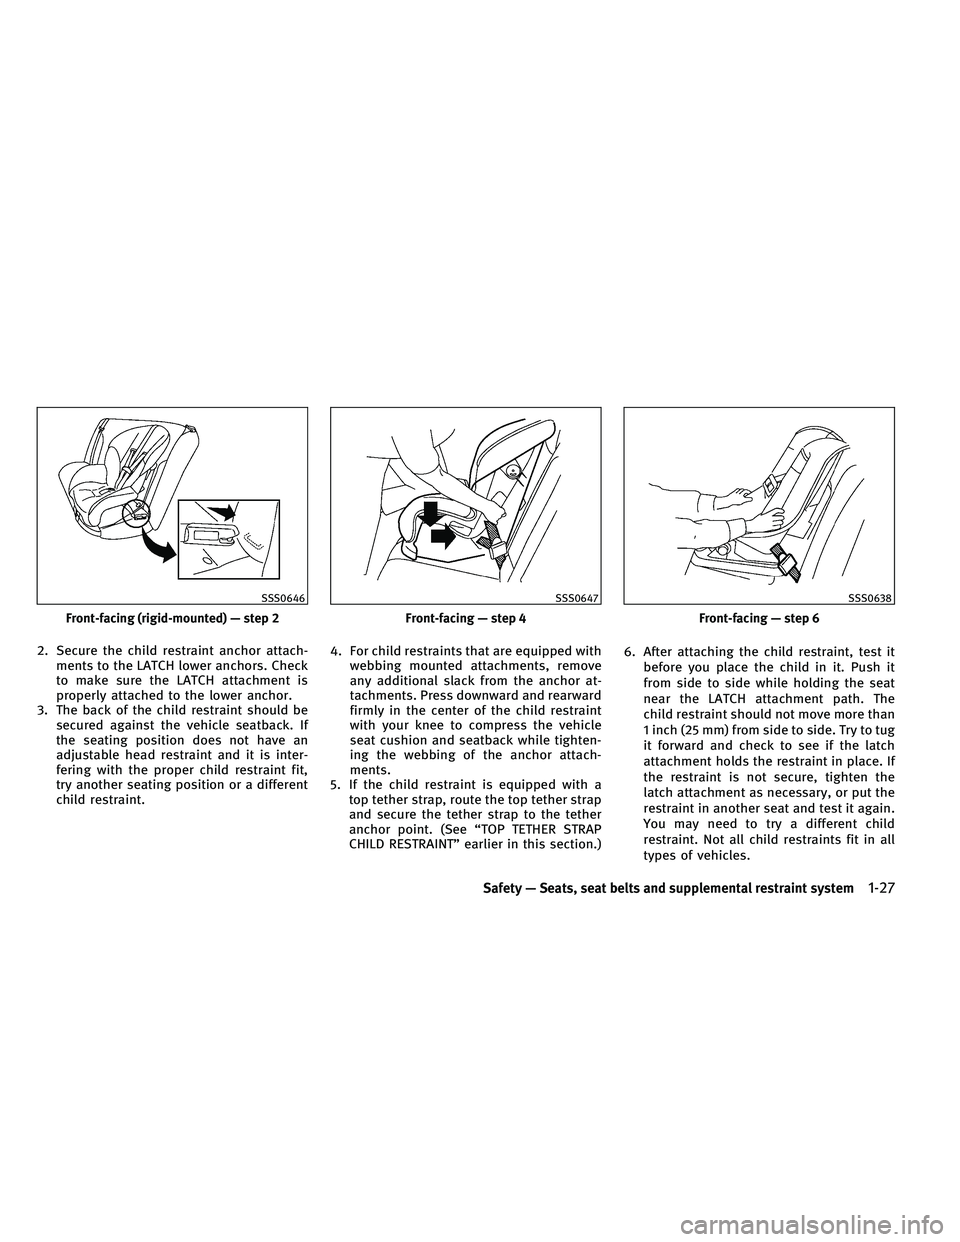 INFINITI G-COUPE 2011 Service Manual 2. Secure the child restraint anchor attach-ments to the LATCH lower anchors. Check
to make sure the LATCH attachment is
properly attached to the lower anchor.
3. The back of the child restraint shoul